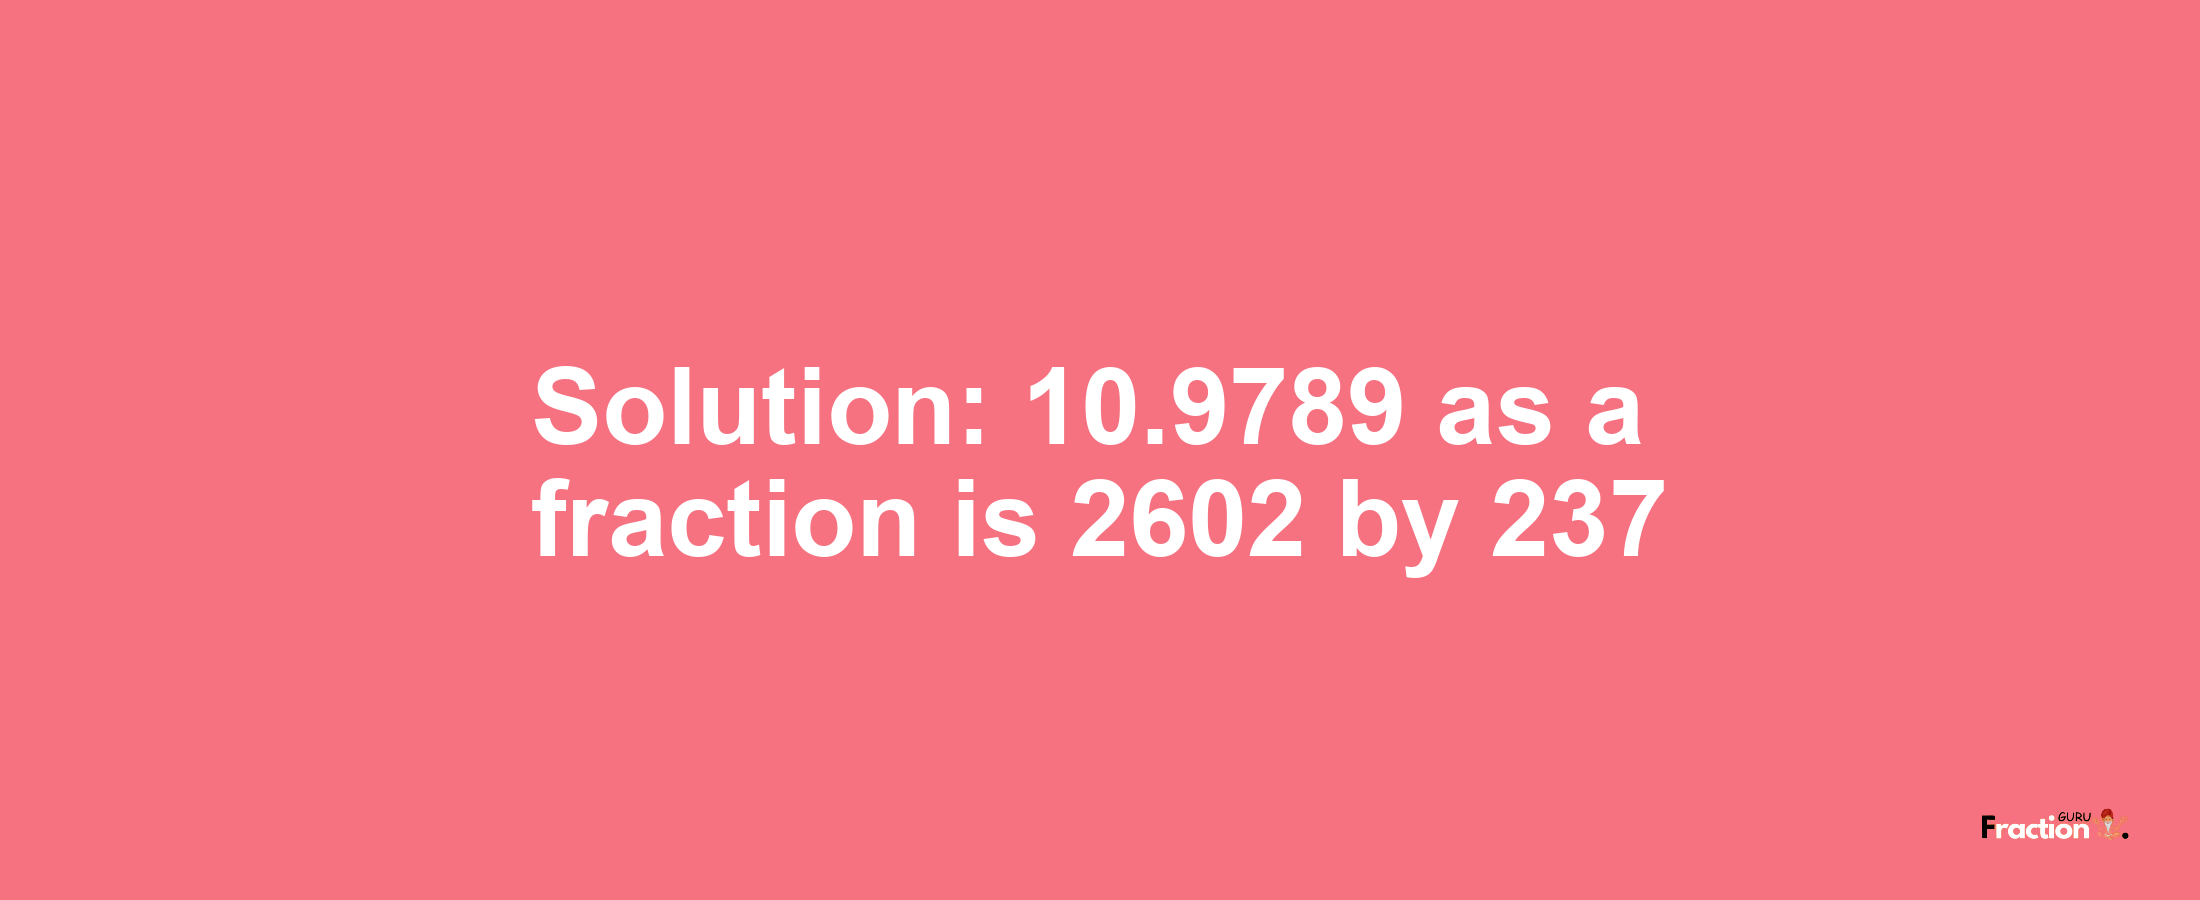 Solution:10.9789 as a fraction is 2602/237